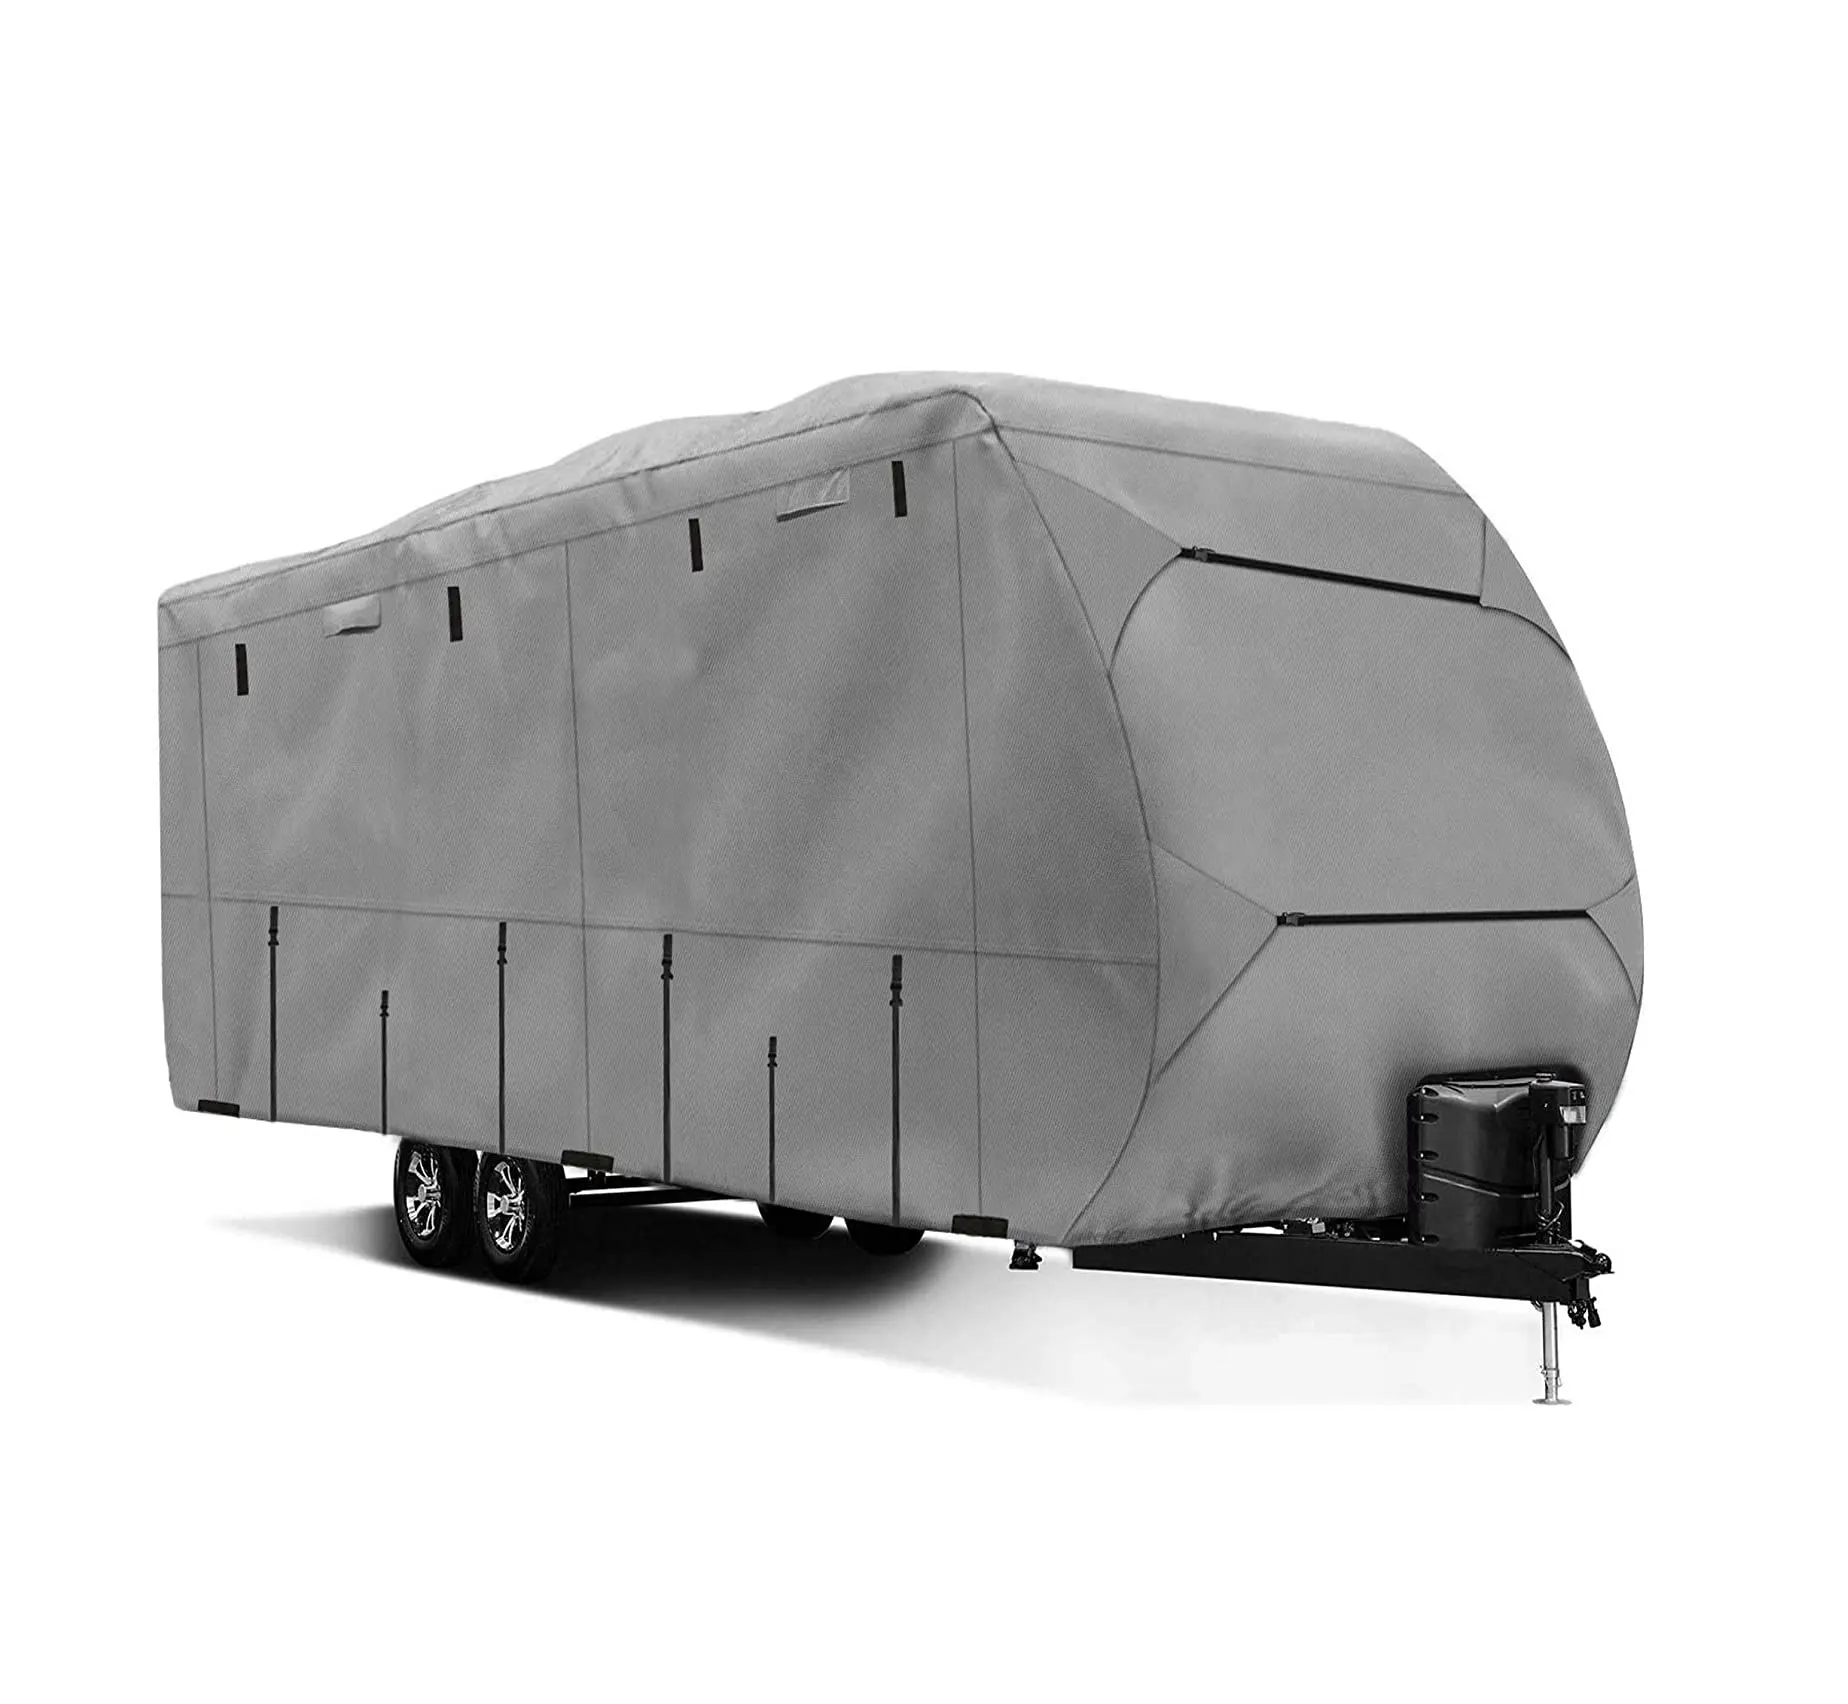 Durable Oxford Waterproof Folding Travel Trailer Rv Cover Folding Camper Cover Waterproof Caravan Cover Fits Up To 60"x36"x5"